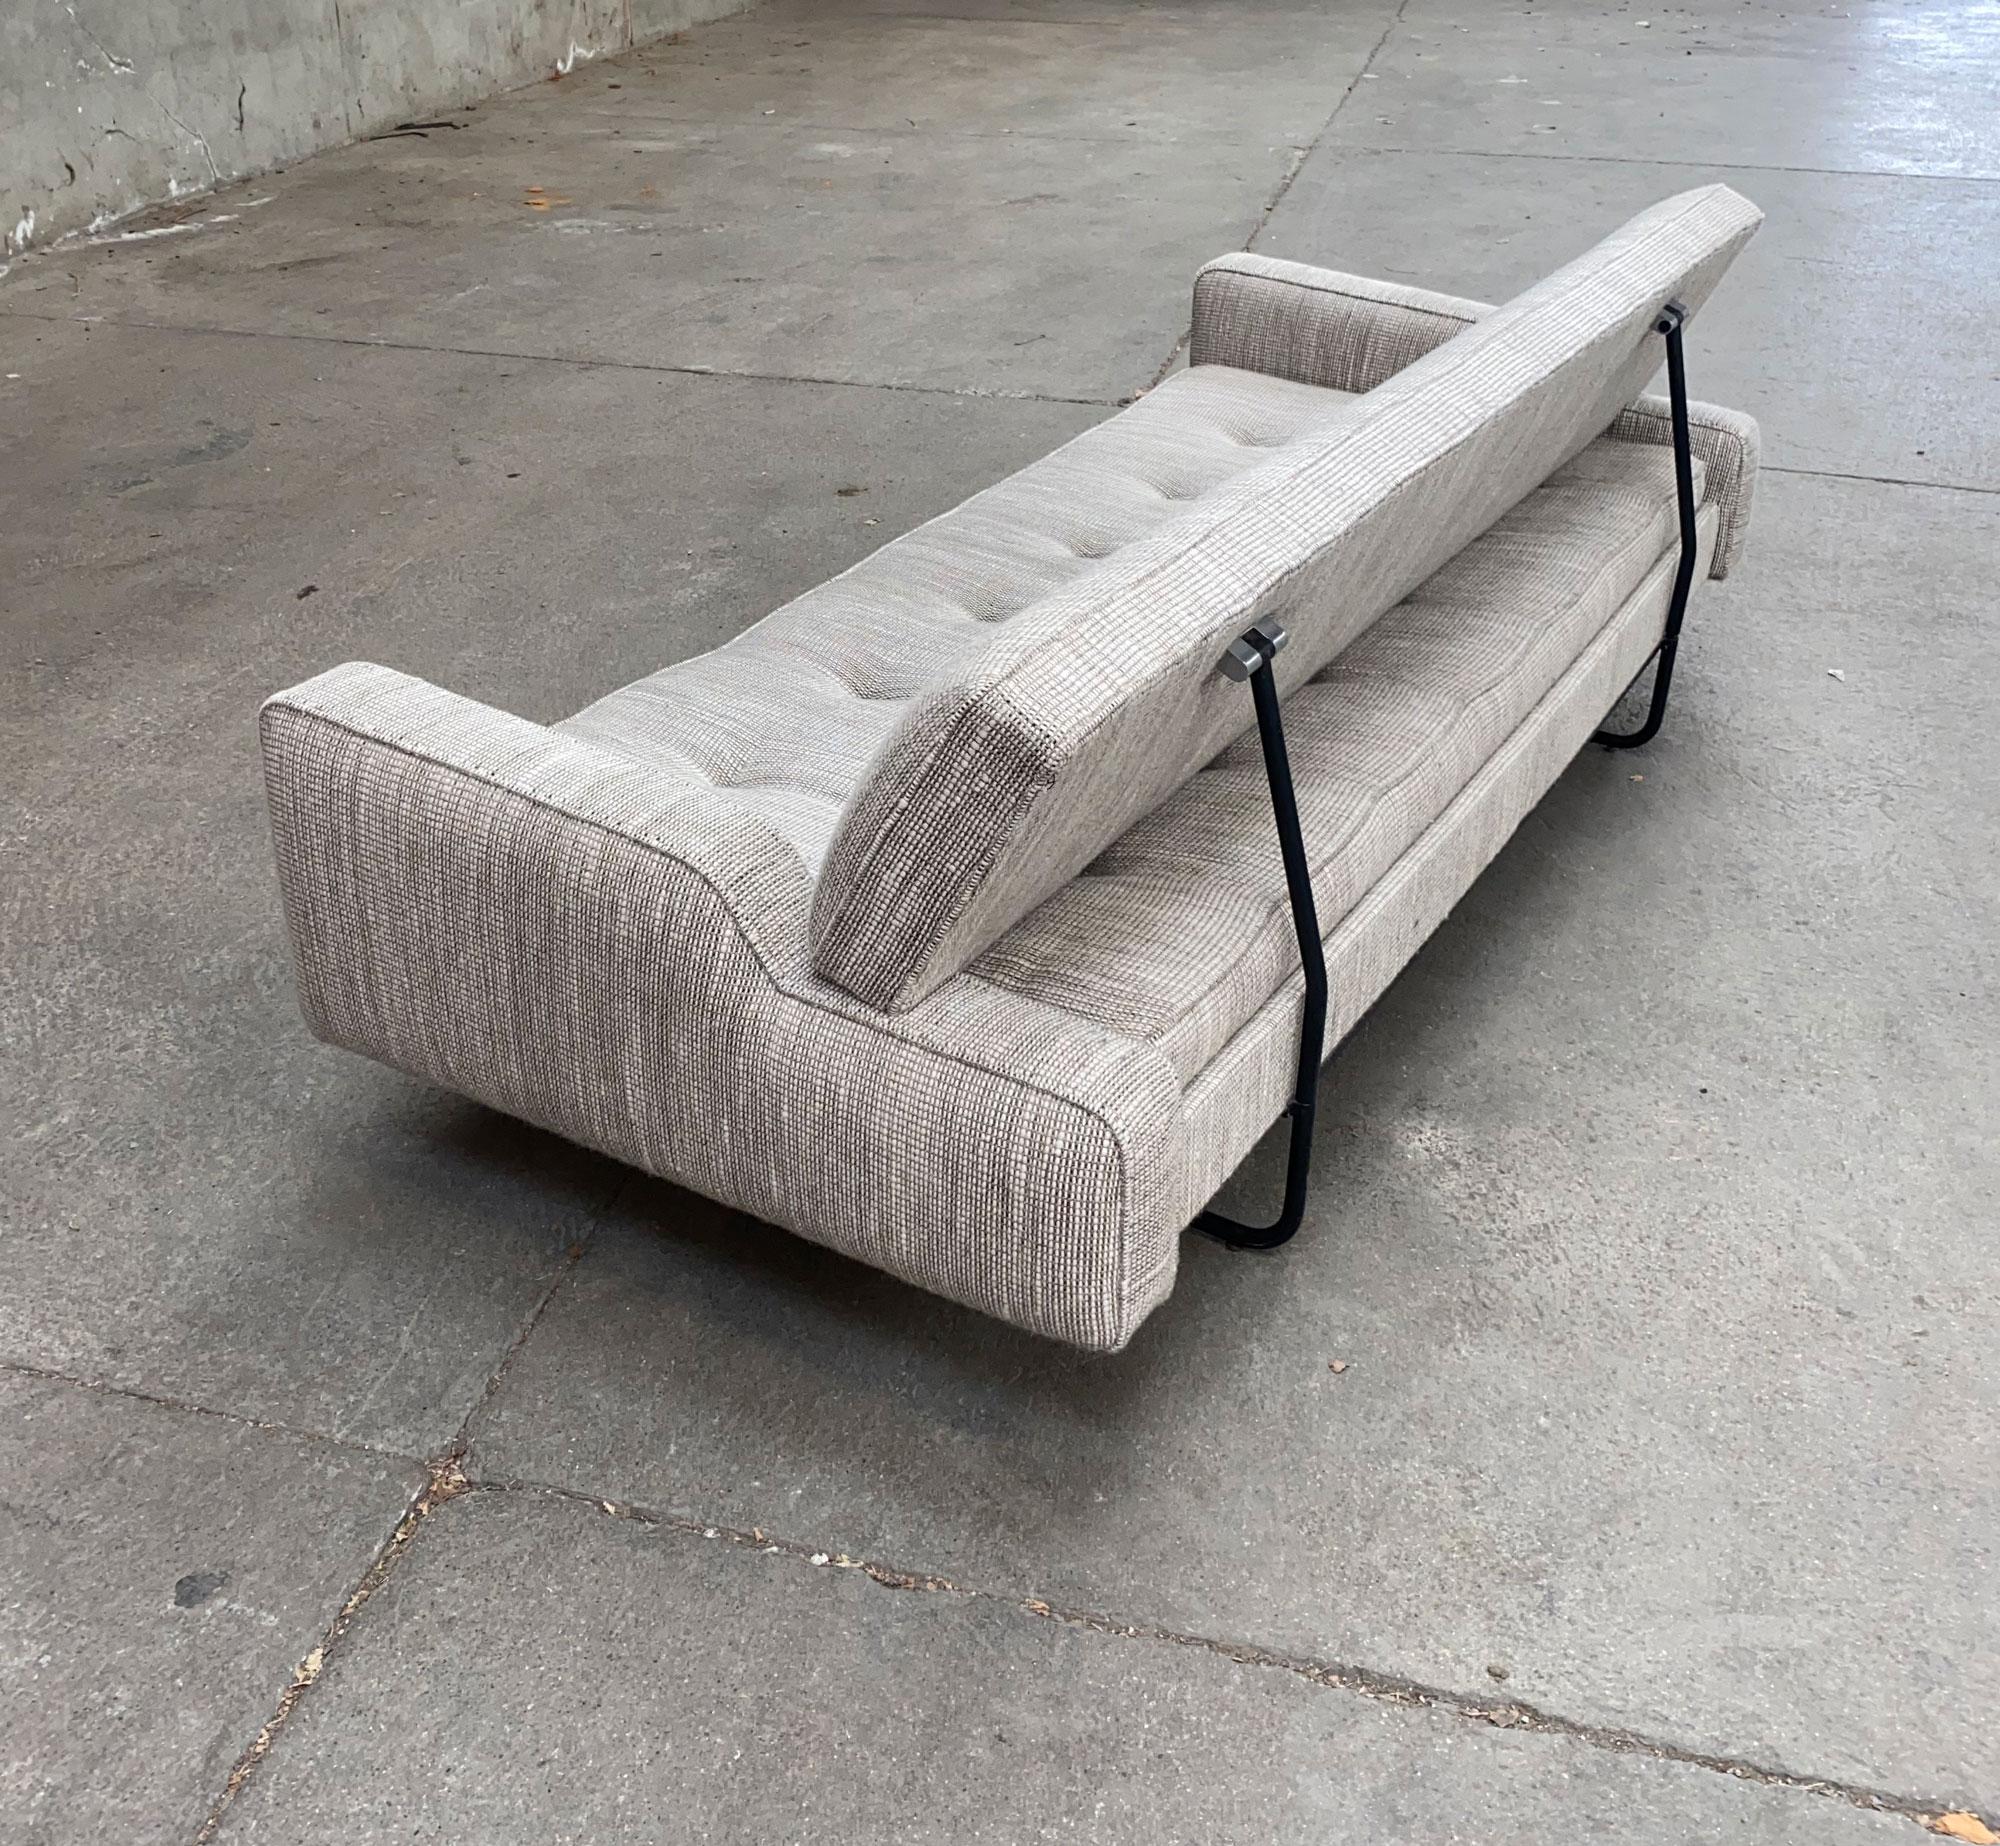 Georges Frydman for EFA
wool sofa and tubular metal structure from the 1950s reupholstered in kvadrat fabric, sofa transforming into a single bed

Georges Frydman (1924-?) is a French designer. Attracted by geometry in space, he entered the Arts